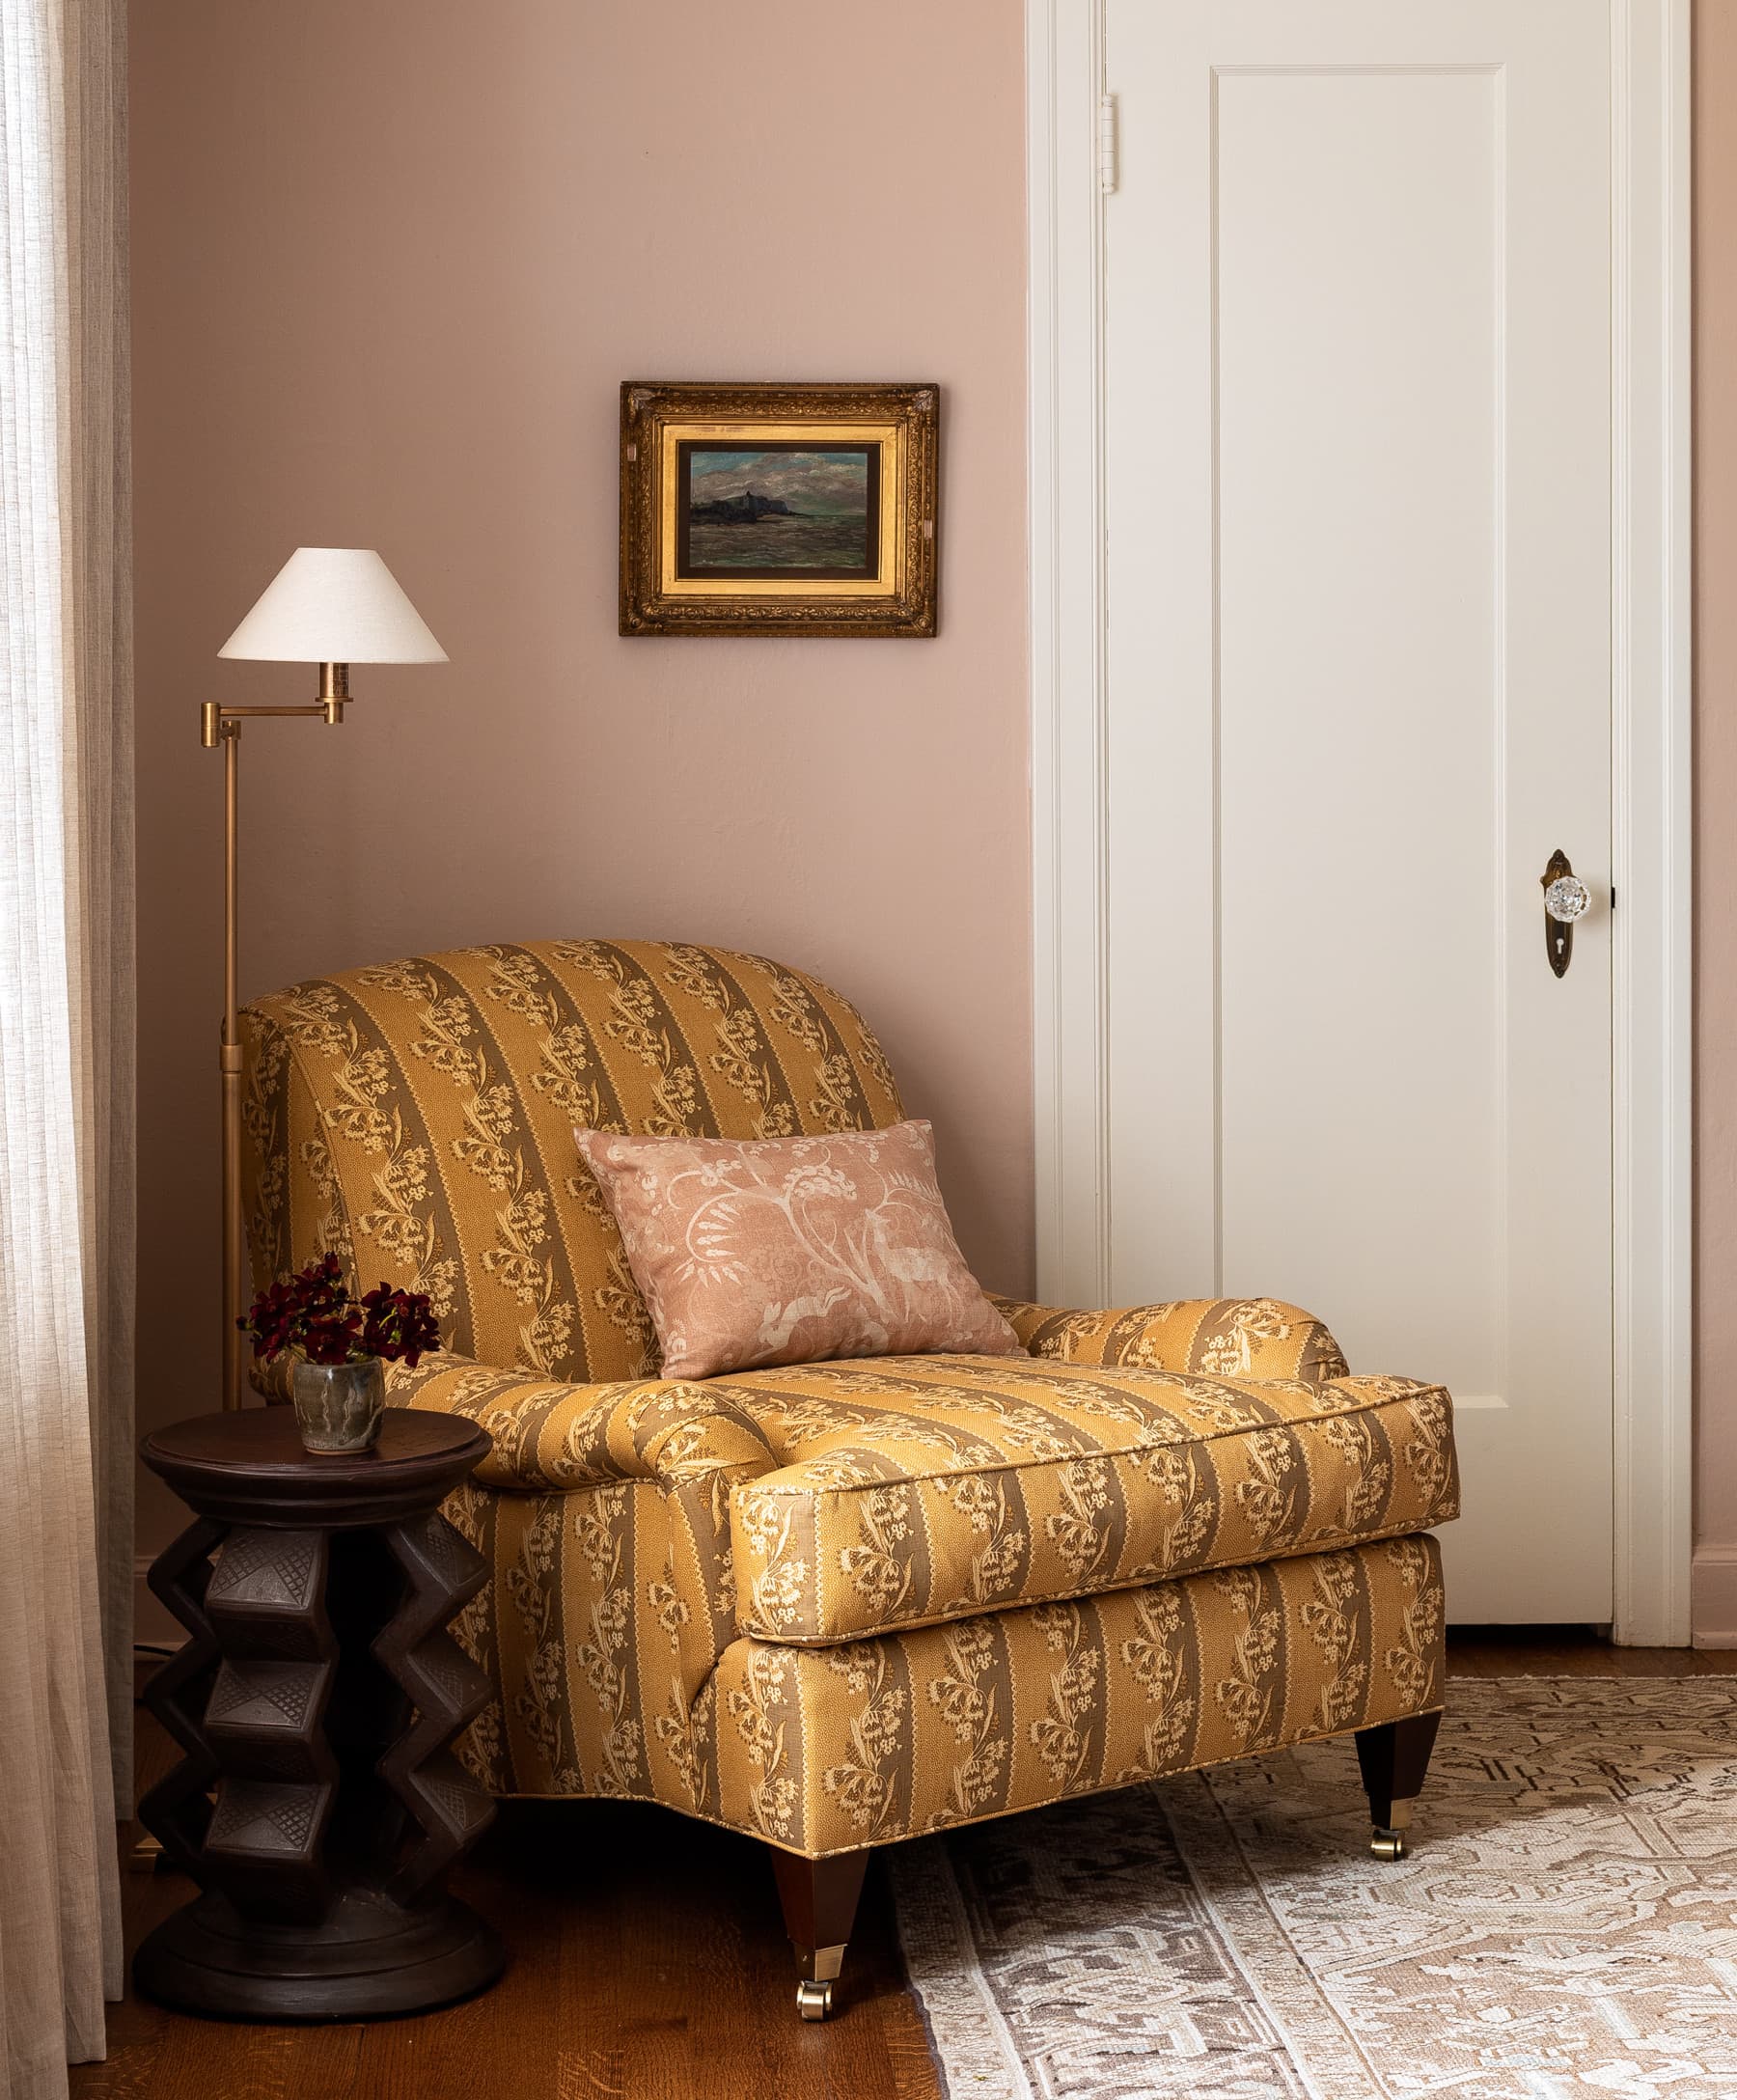 home tour featuring a vintage inspired cottage bedroom nook showcasing a armchair in retro floral patterned upholstery